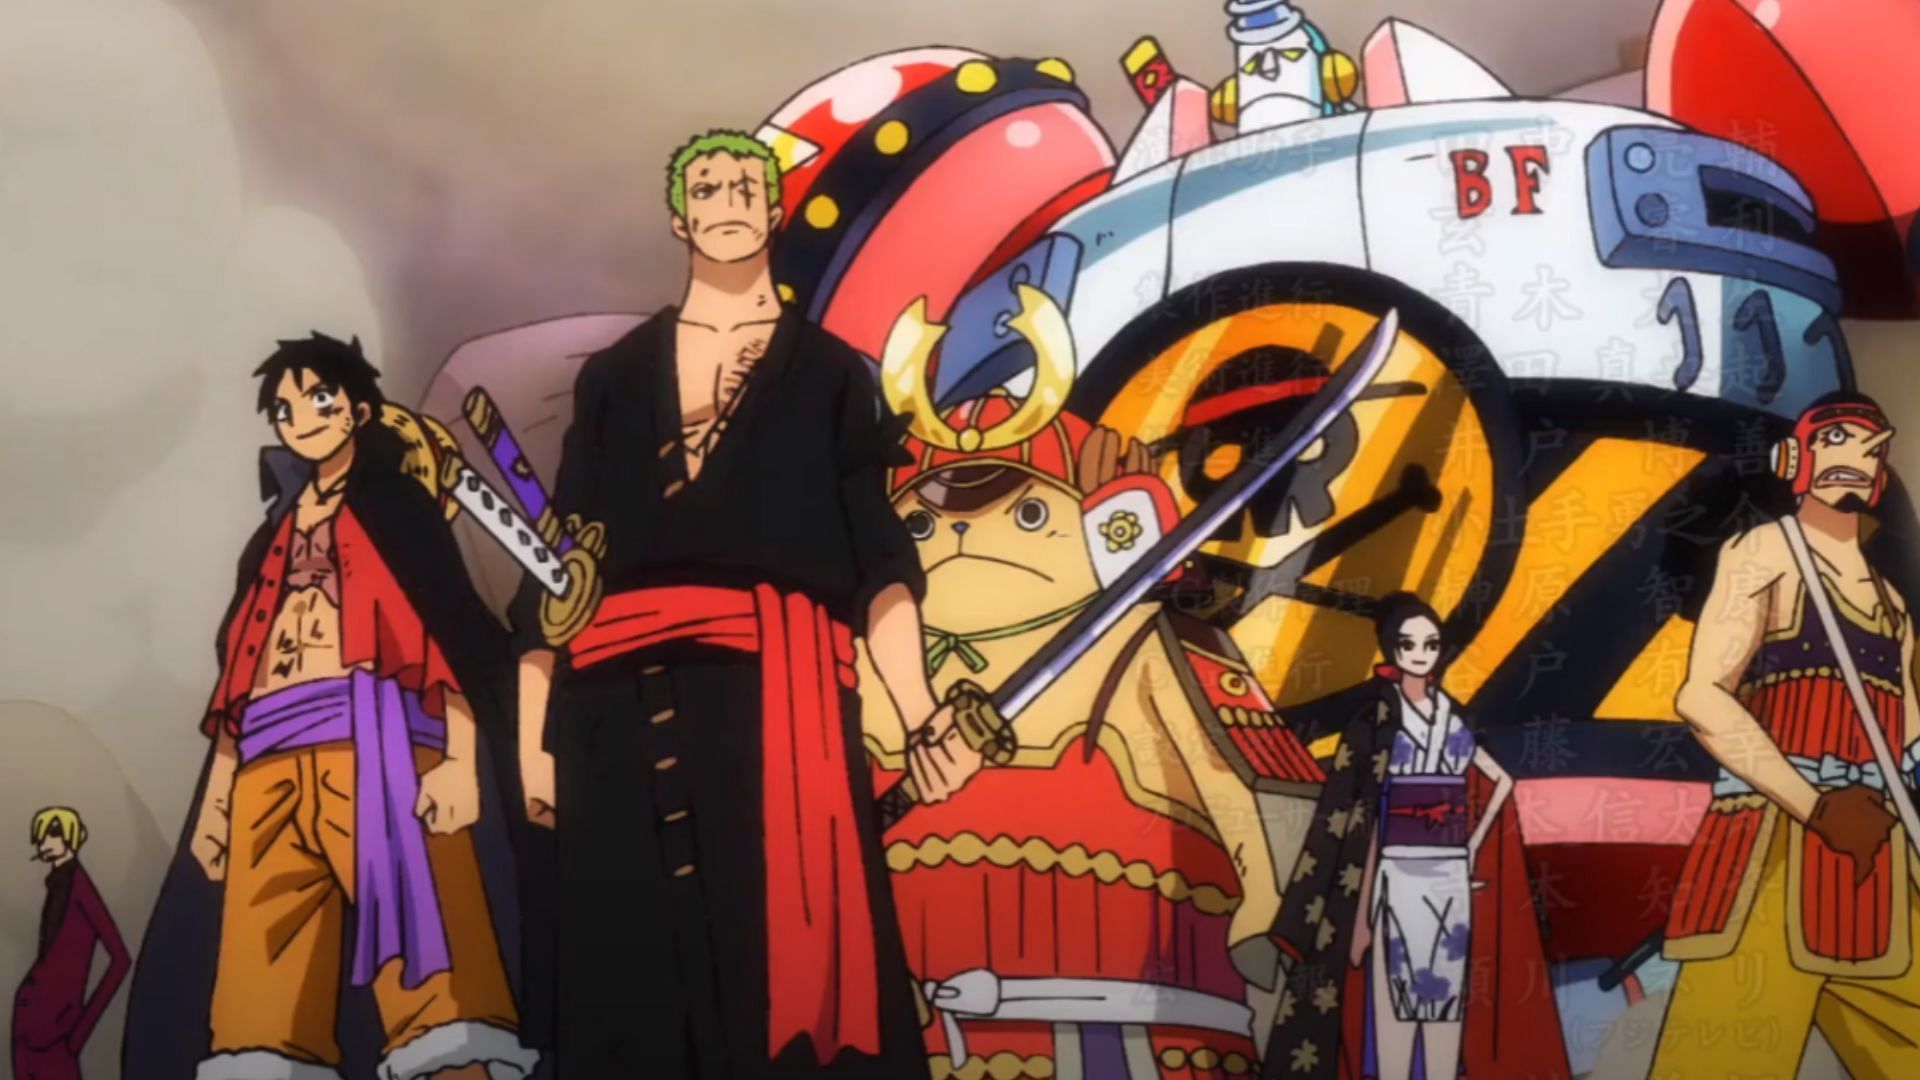 The Straw Hats as seen in the anime (Image via Toei Animation)